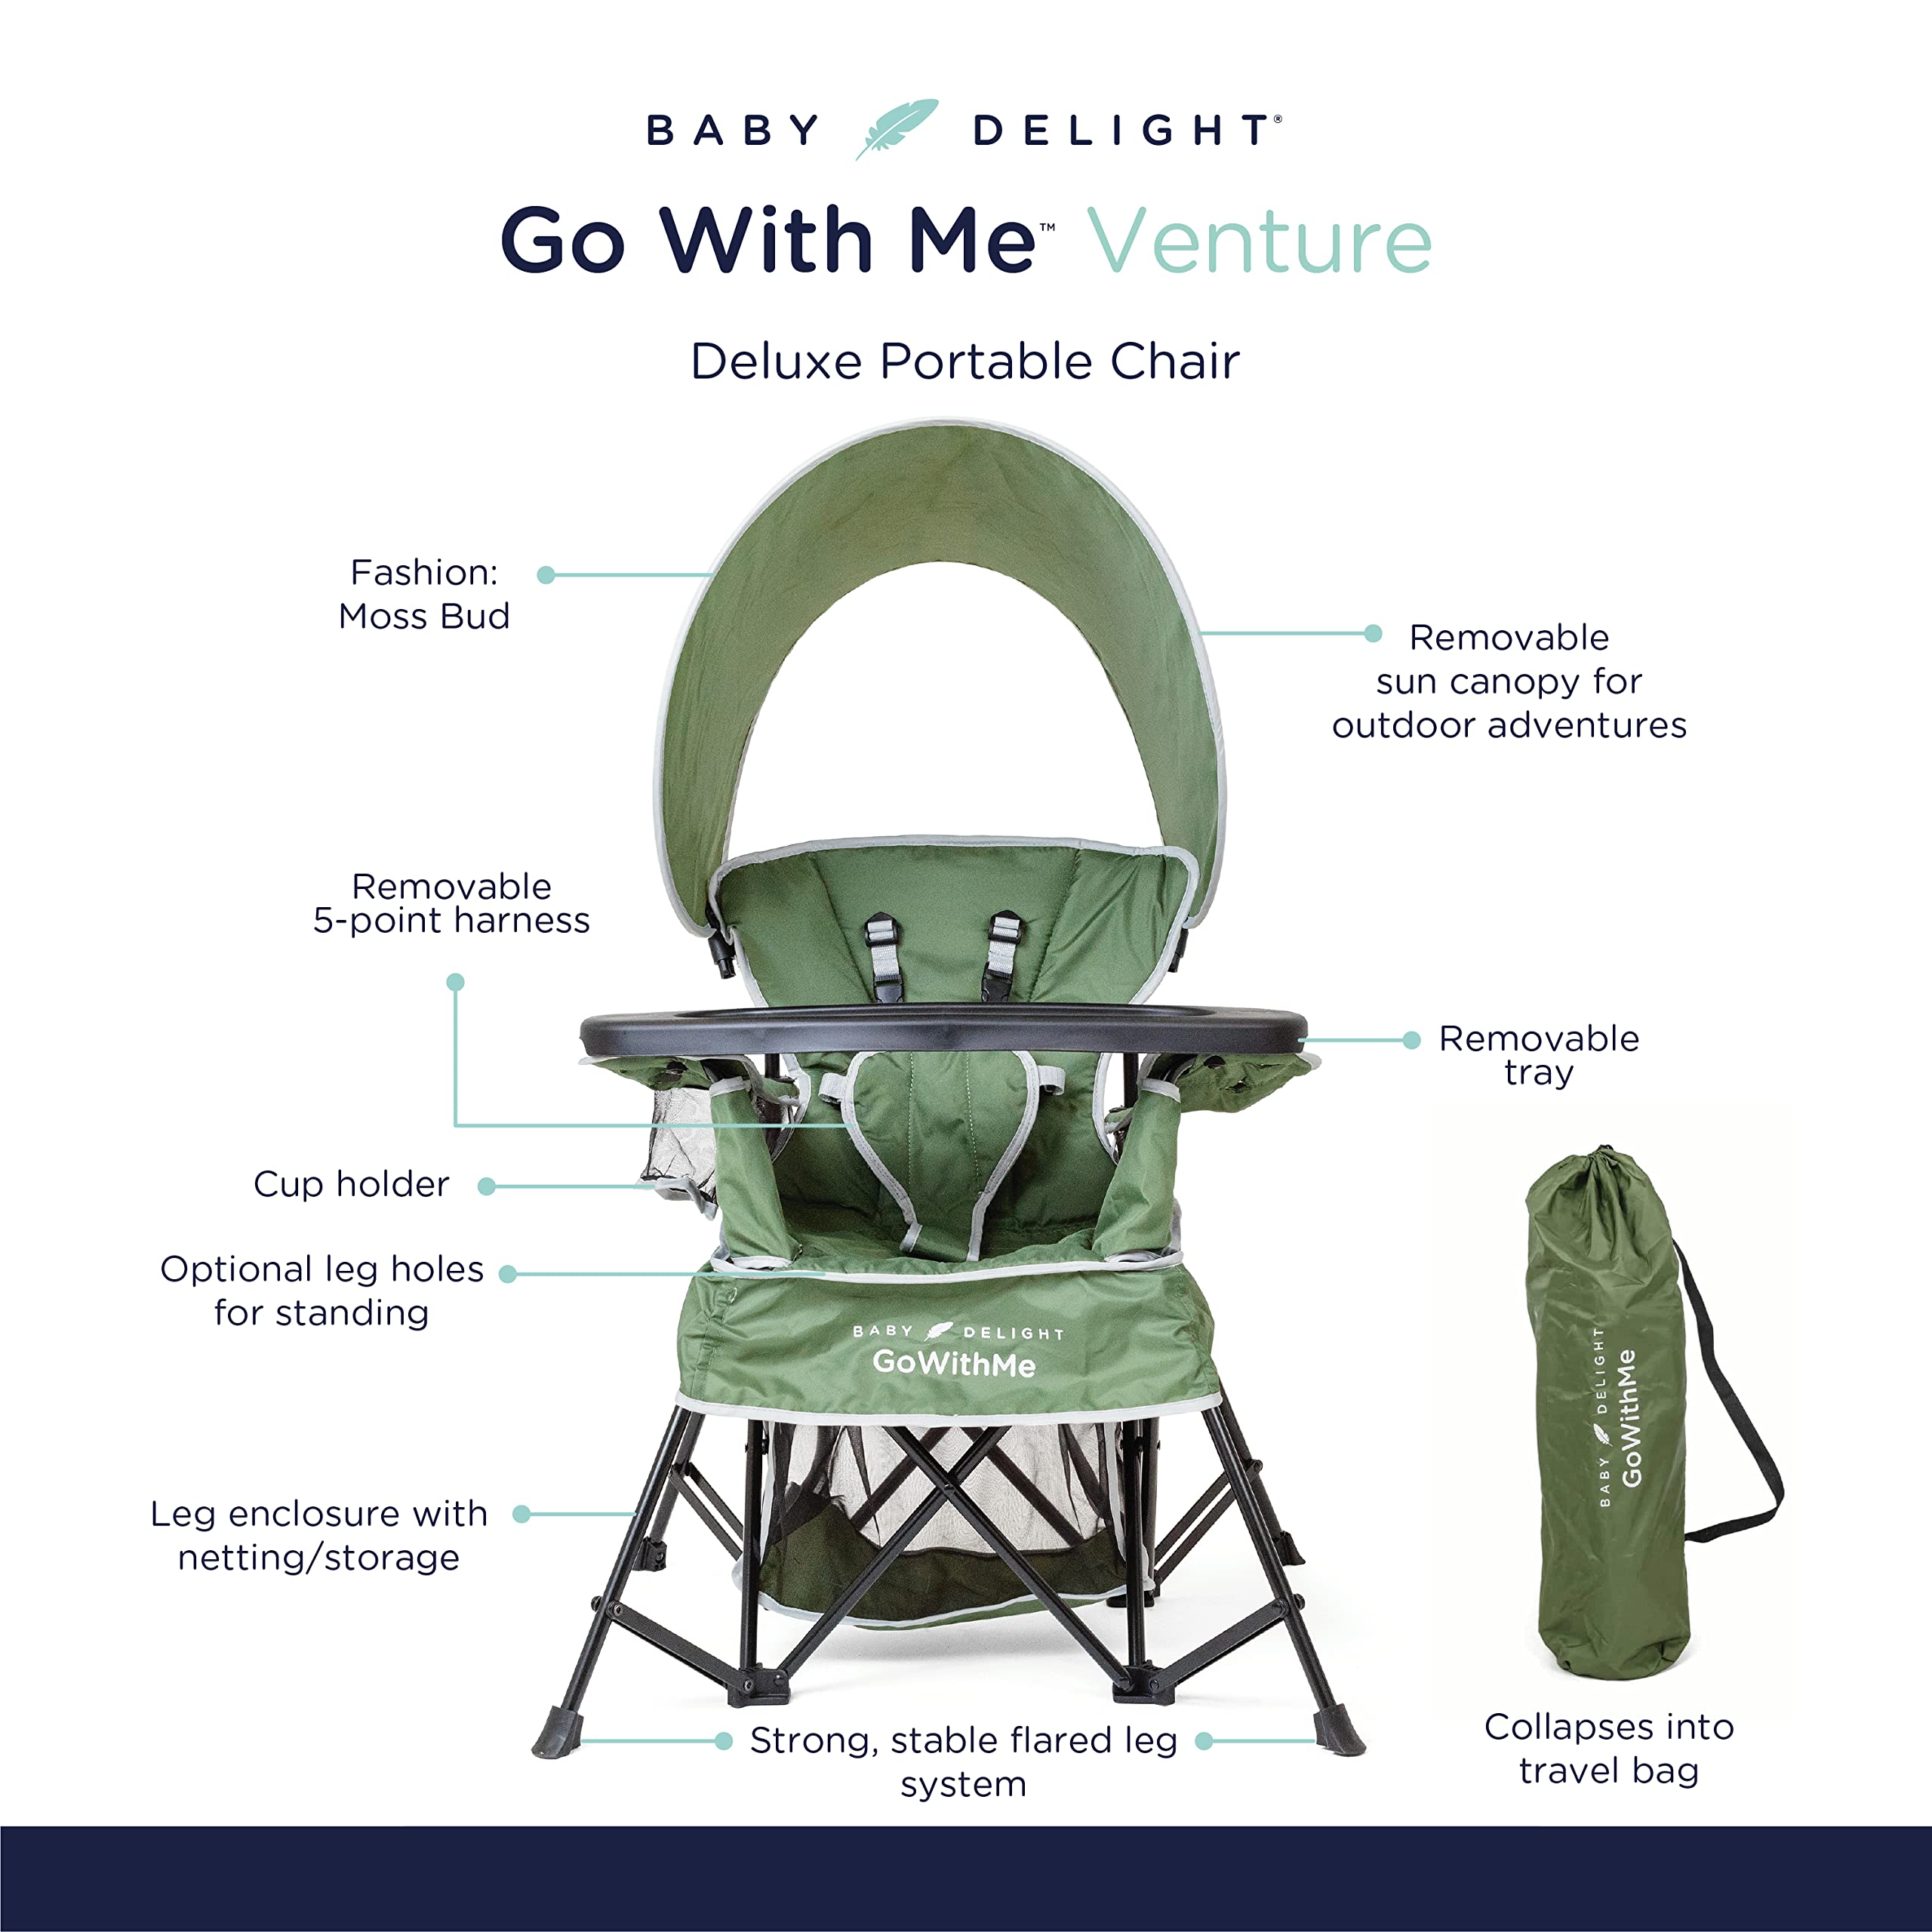 Baby Delight Go with Me Venture Portable Chair | Indoor and Outdoor | Sun Canopy | 3 Child Growth Stages | Moss Bud Green